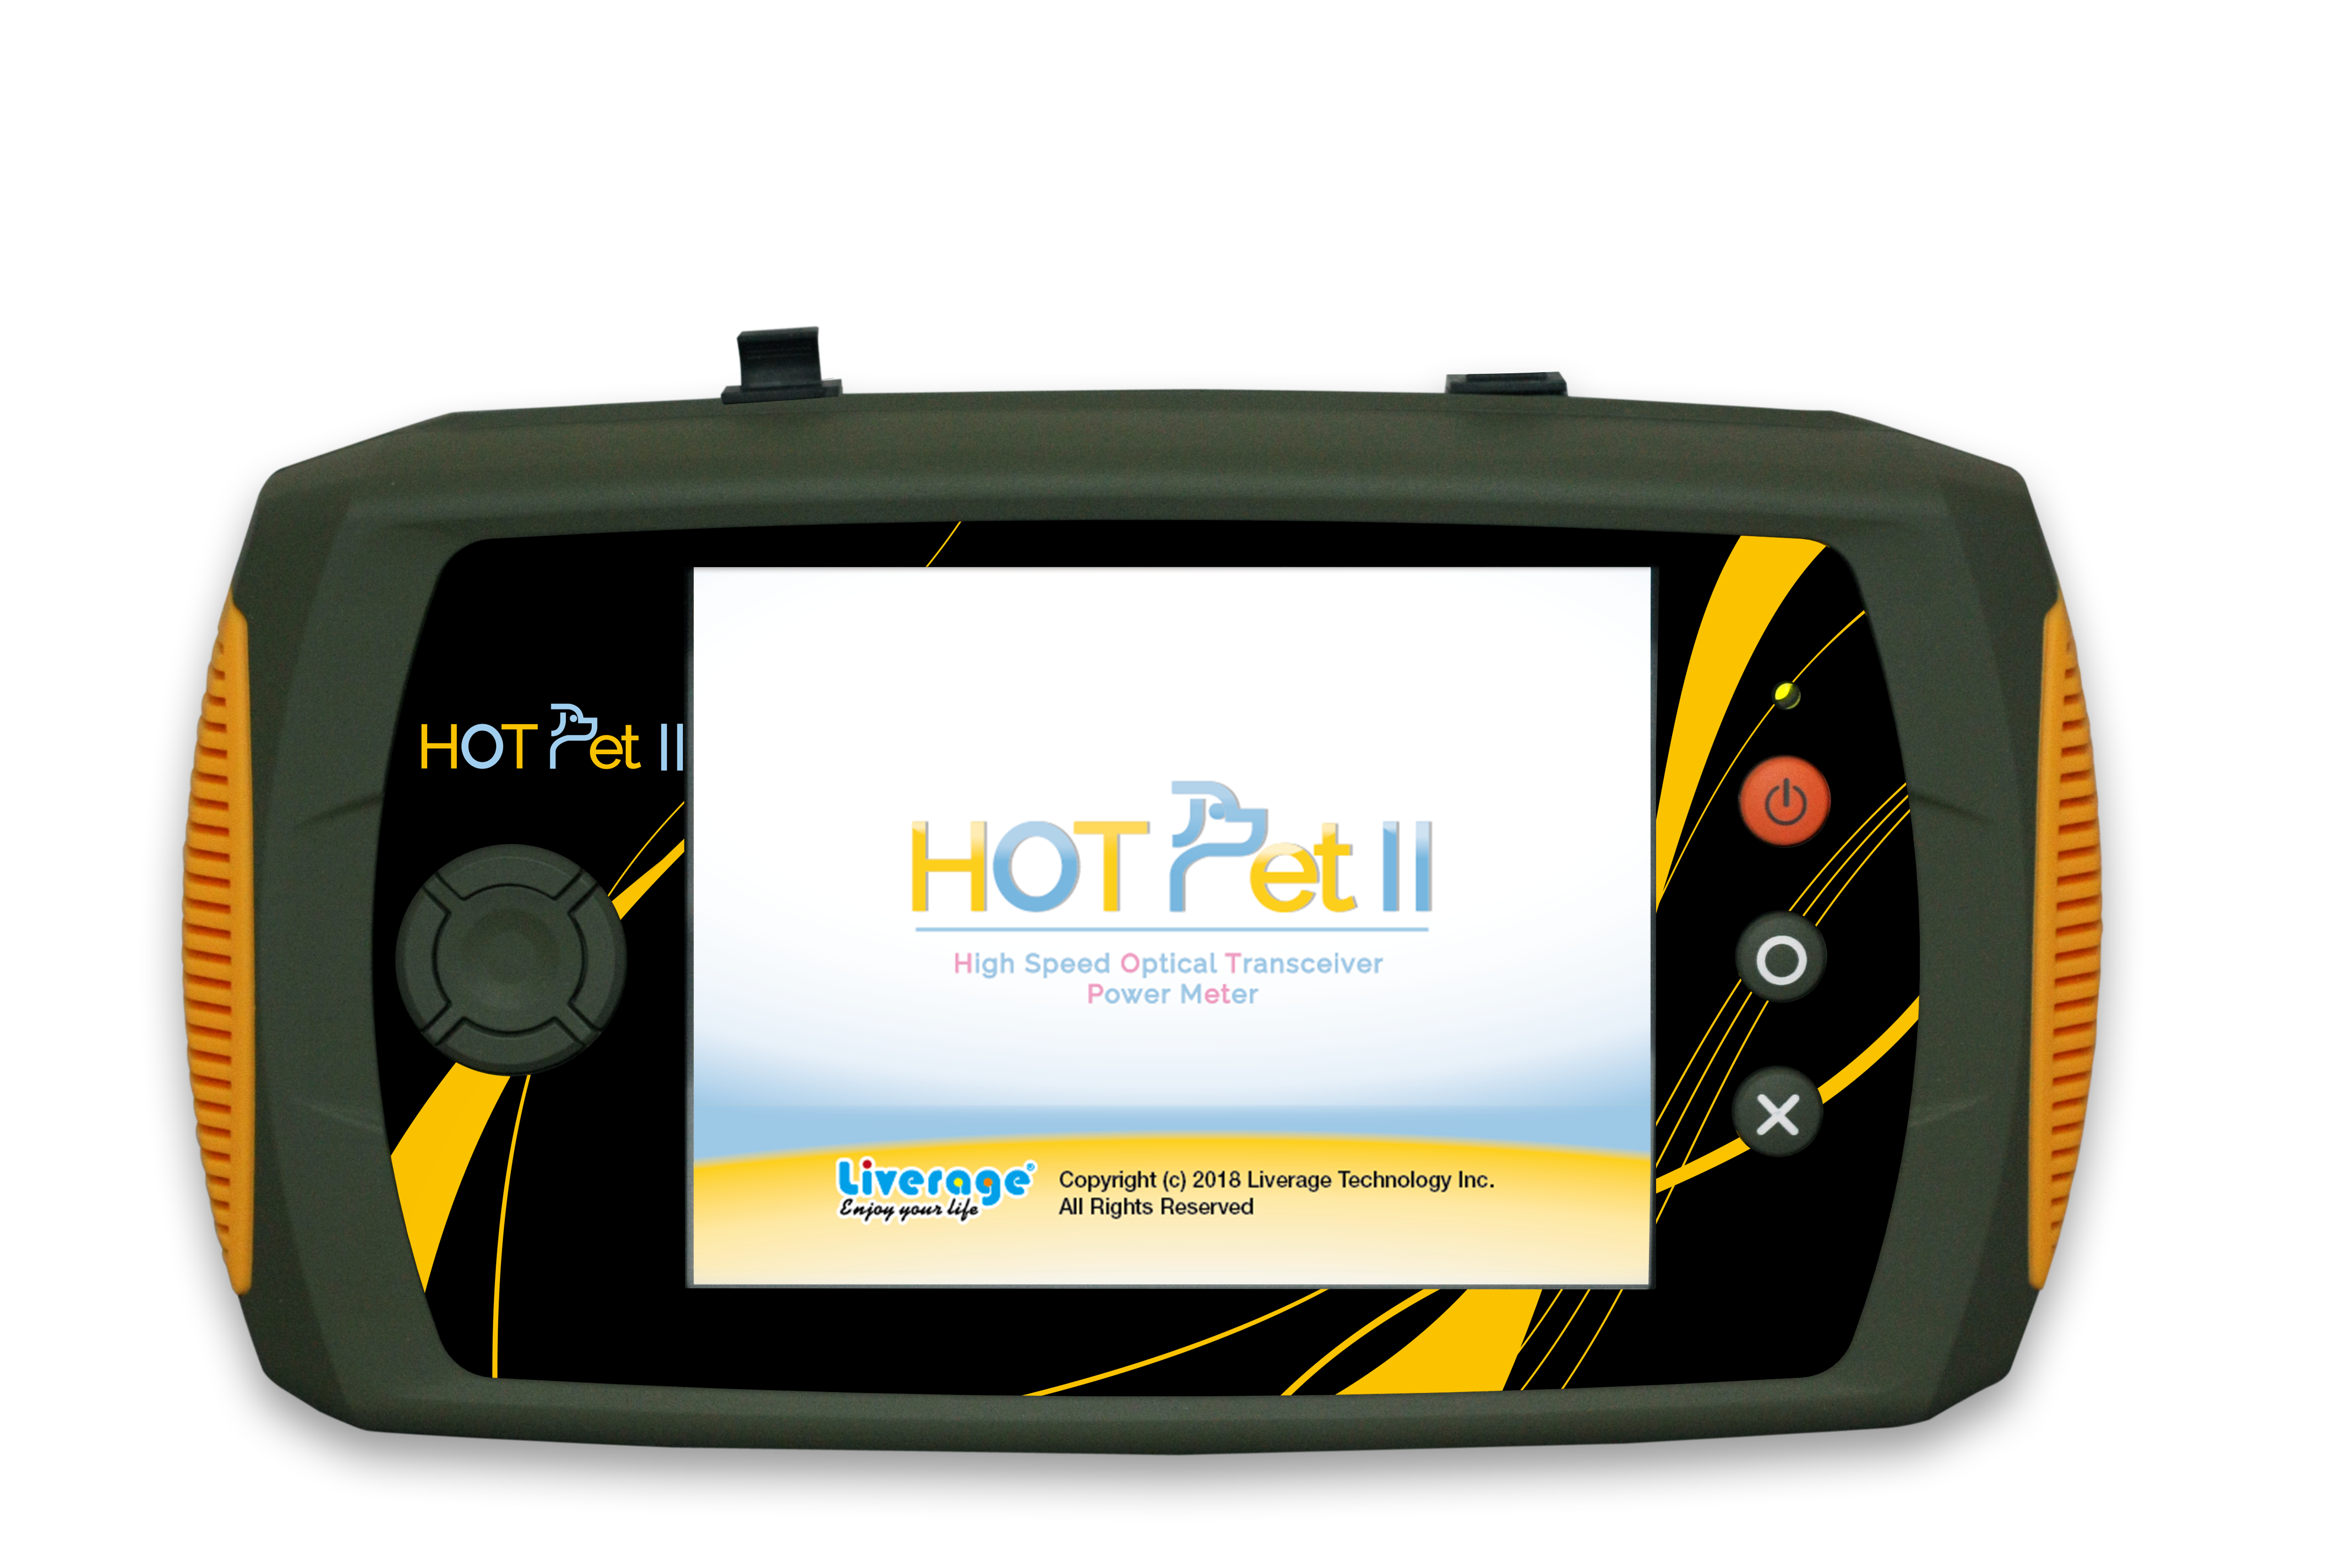 The HOT Pet II is designed for 40 Gbps ~ 400 Gbps optical networking power meters.